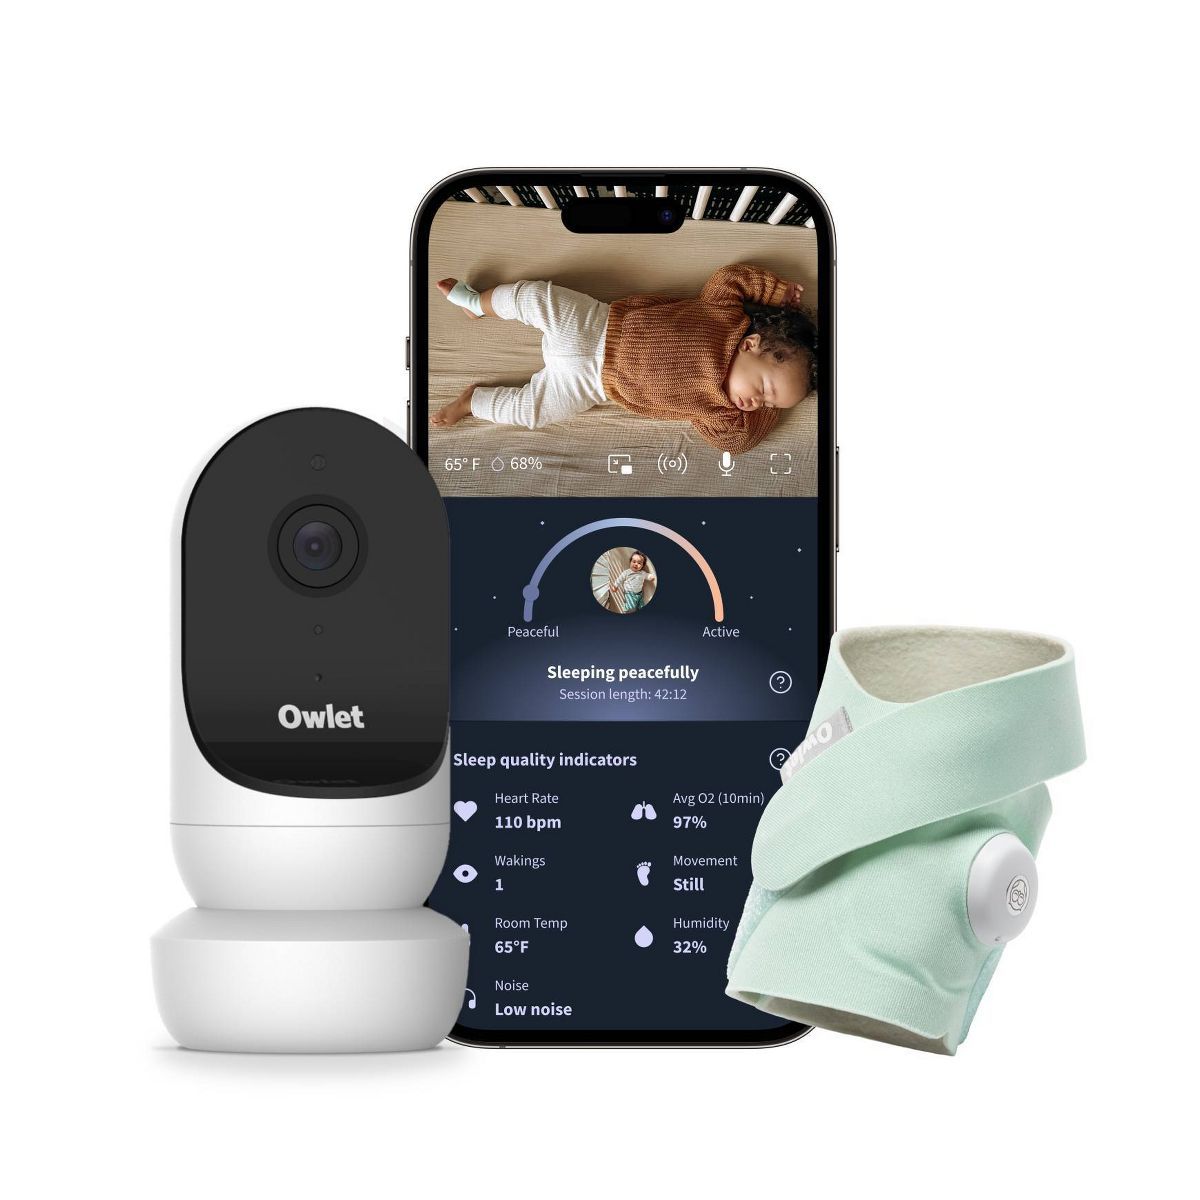 Owlet Dream Duo 2 Smart Baby Monitor - 1080p HD Video Baby Monitor with Dream Sock | Target